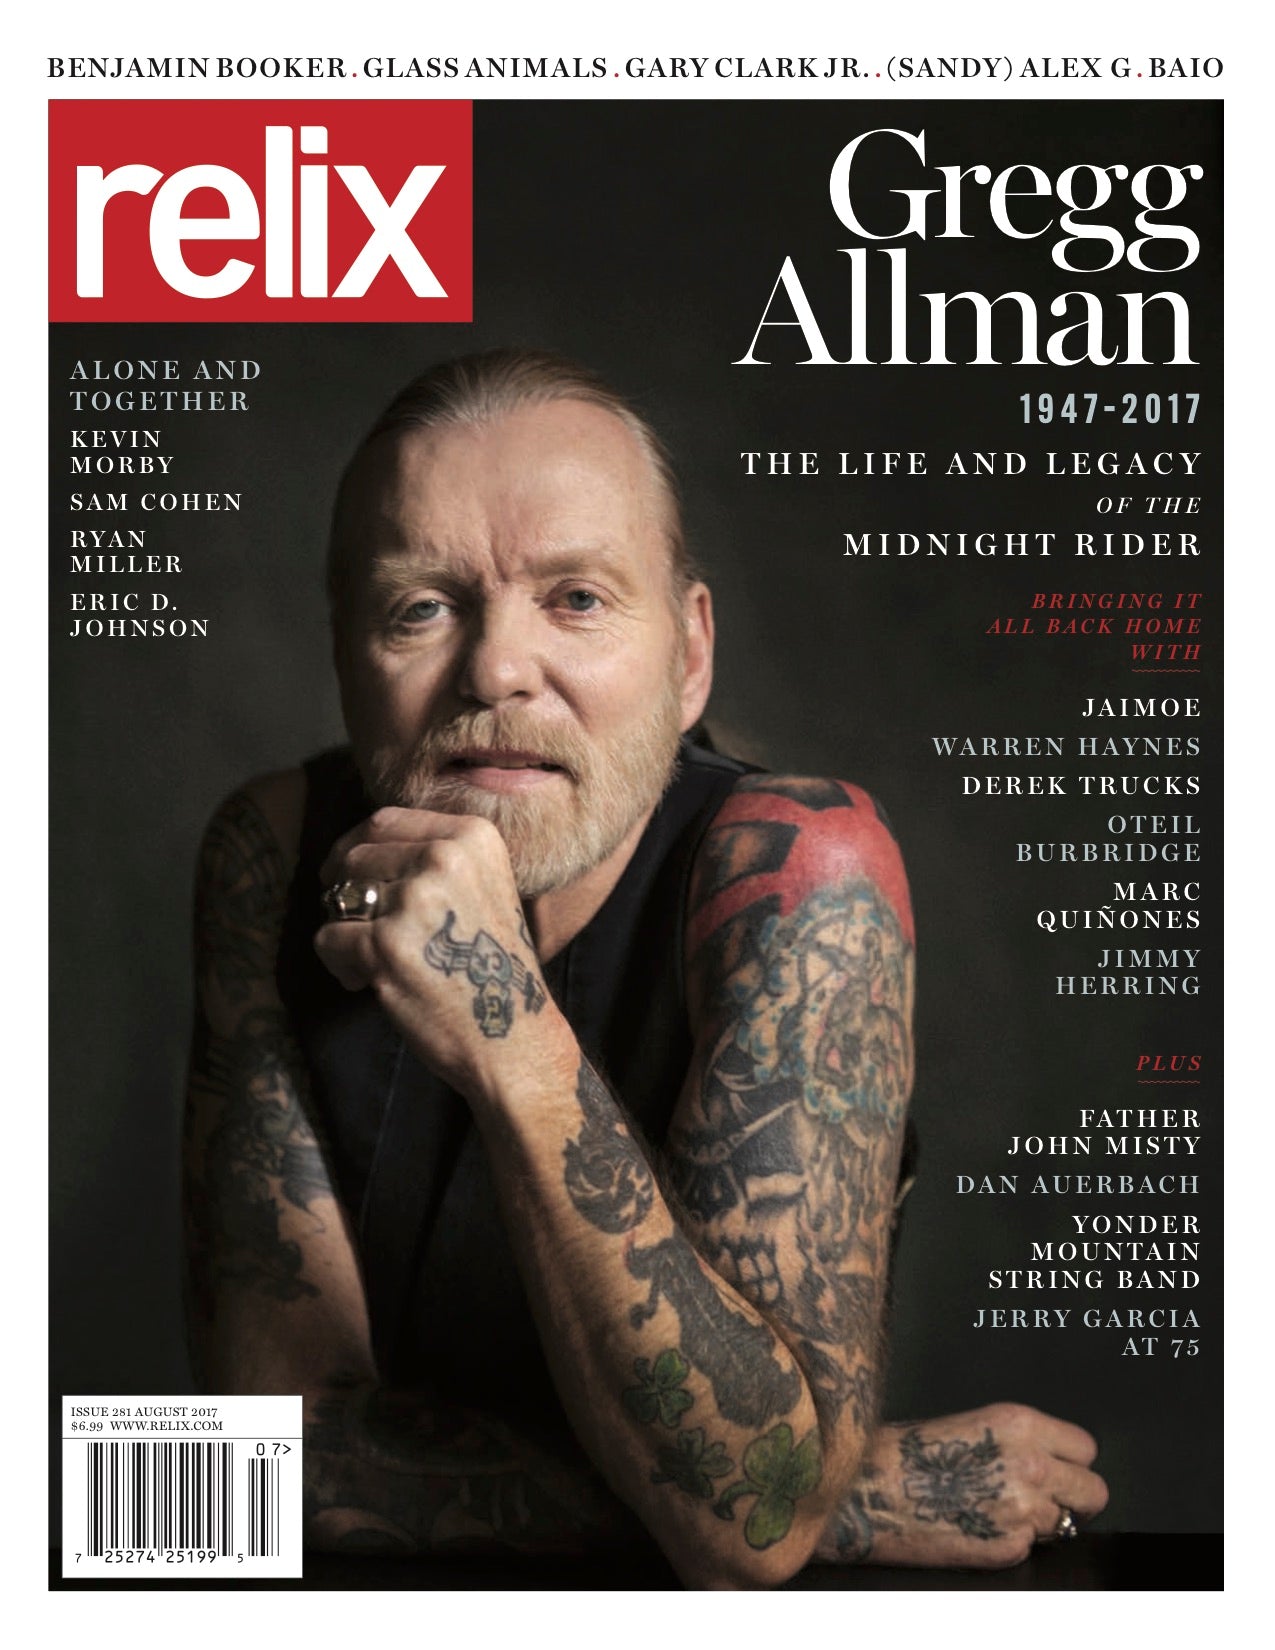 August 2017 Relix Cover Poster Featuring Gregg Allman - 30" x 40" (Printed on Vinyl)